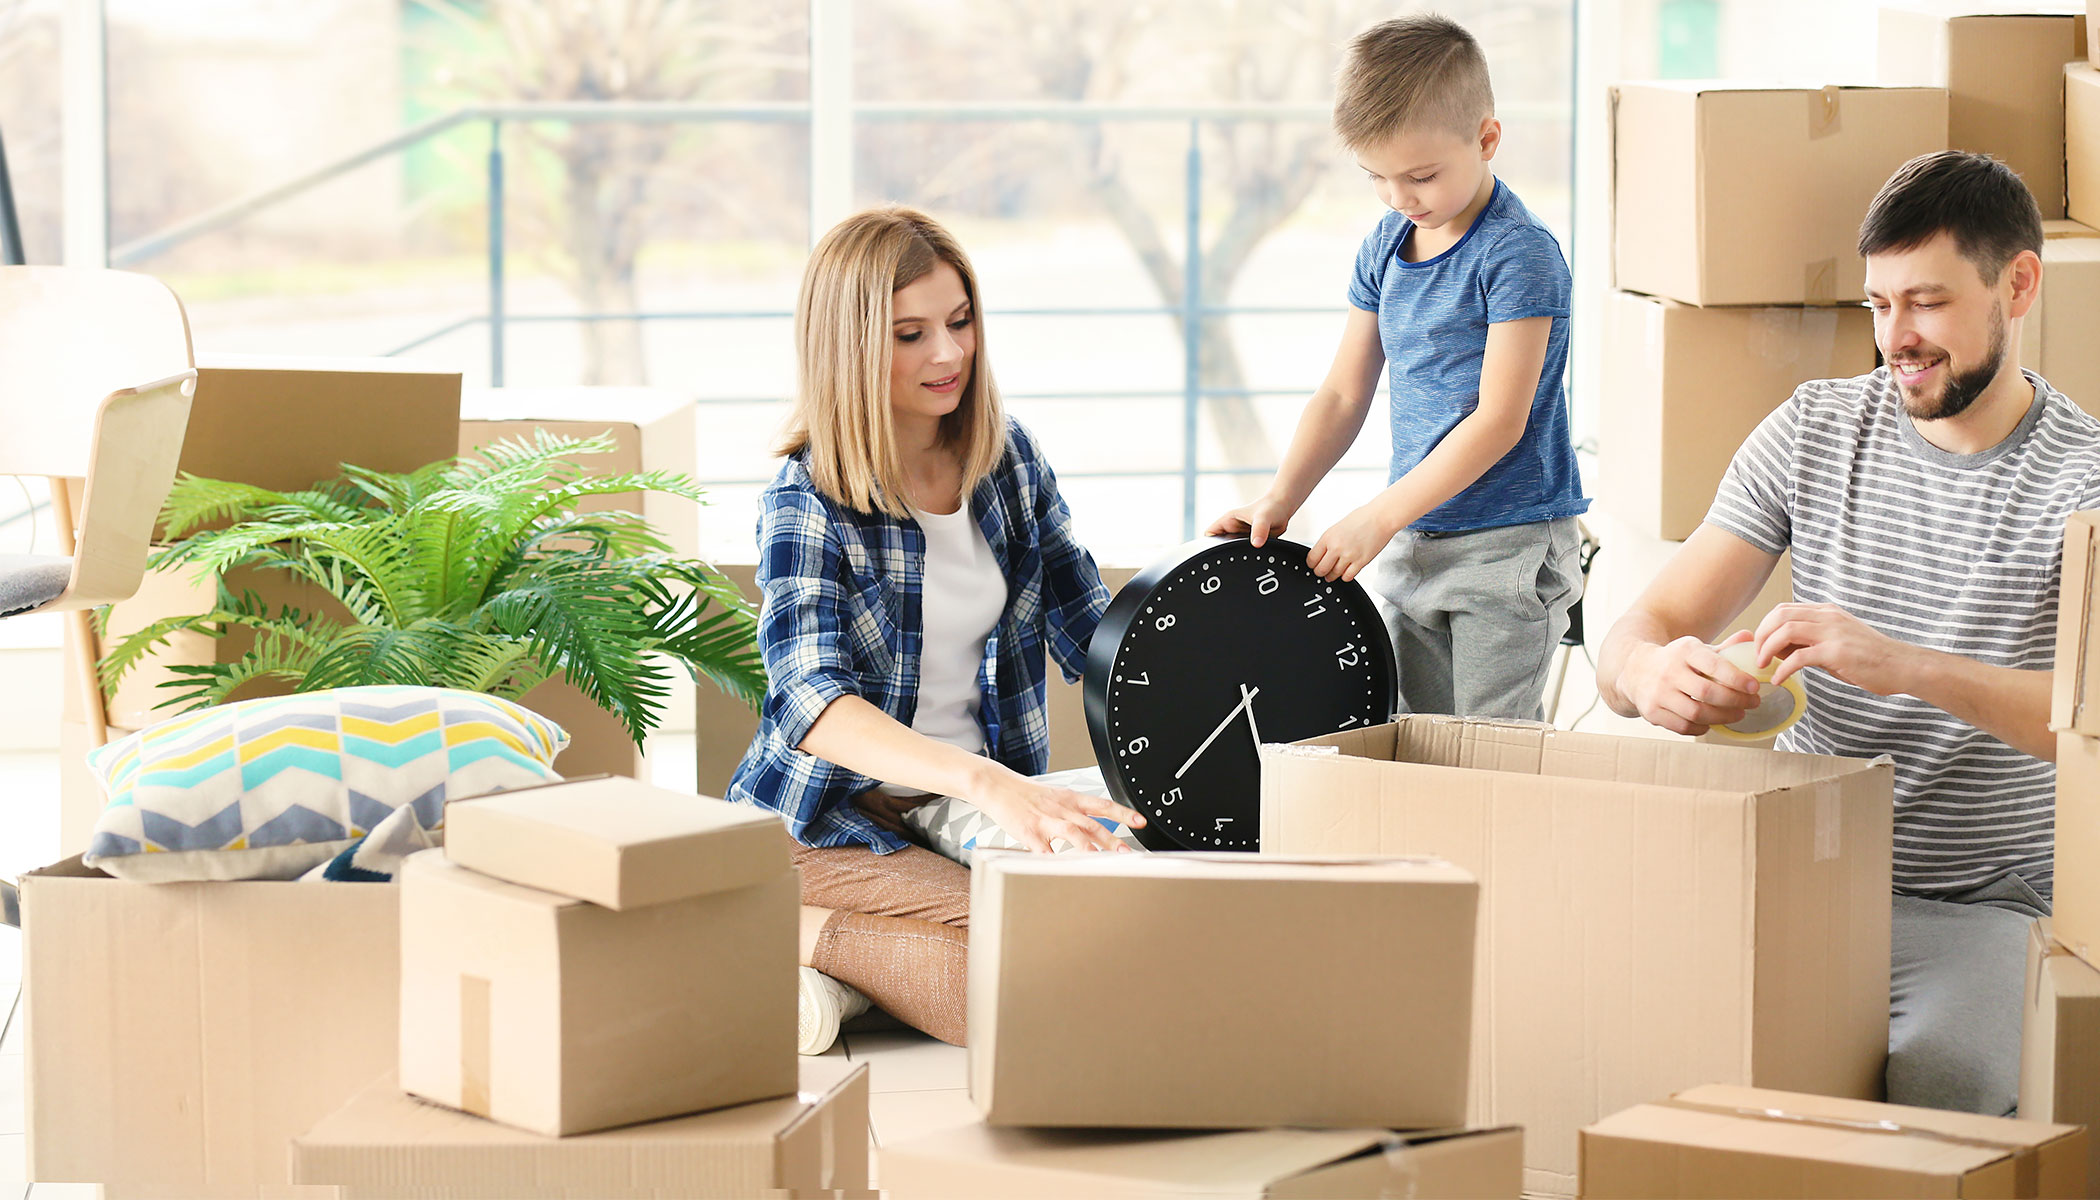 Family packing for a move - Packing tips from BigSteelBox